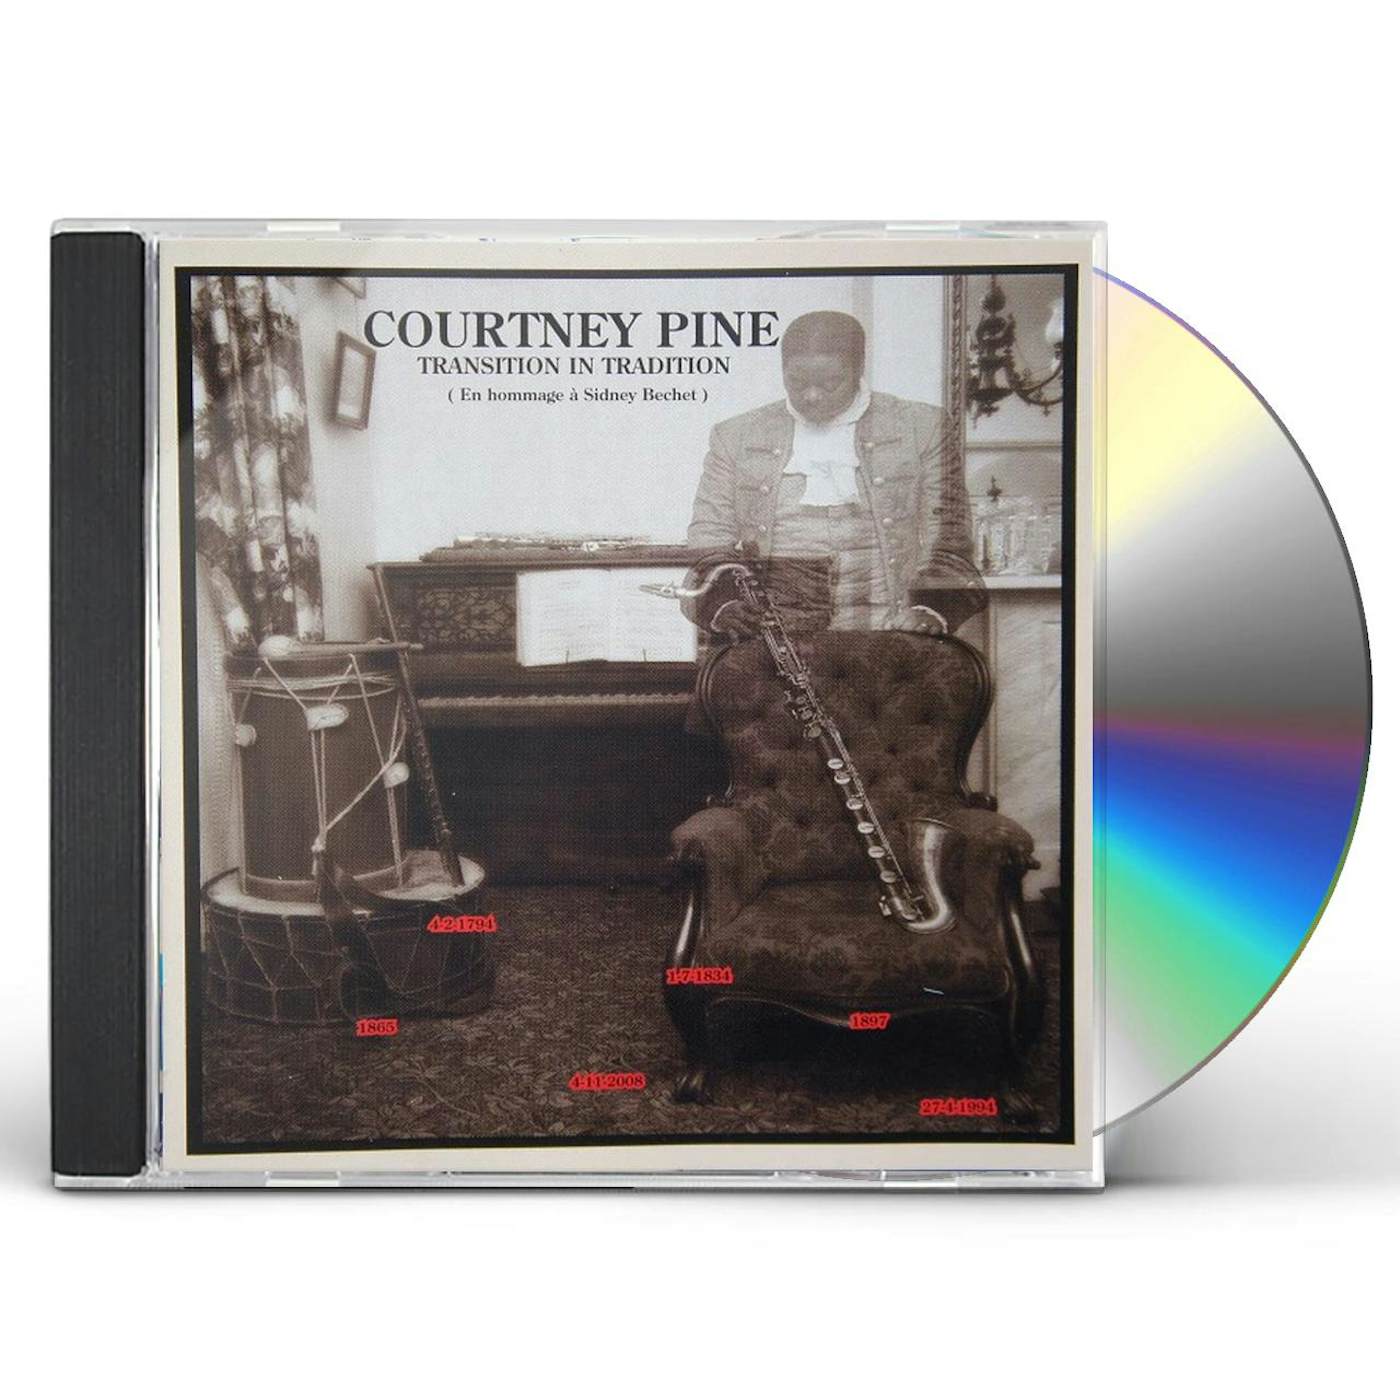 Courtney Pine TRANSITION IN TRADITION CD